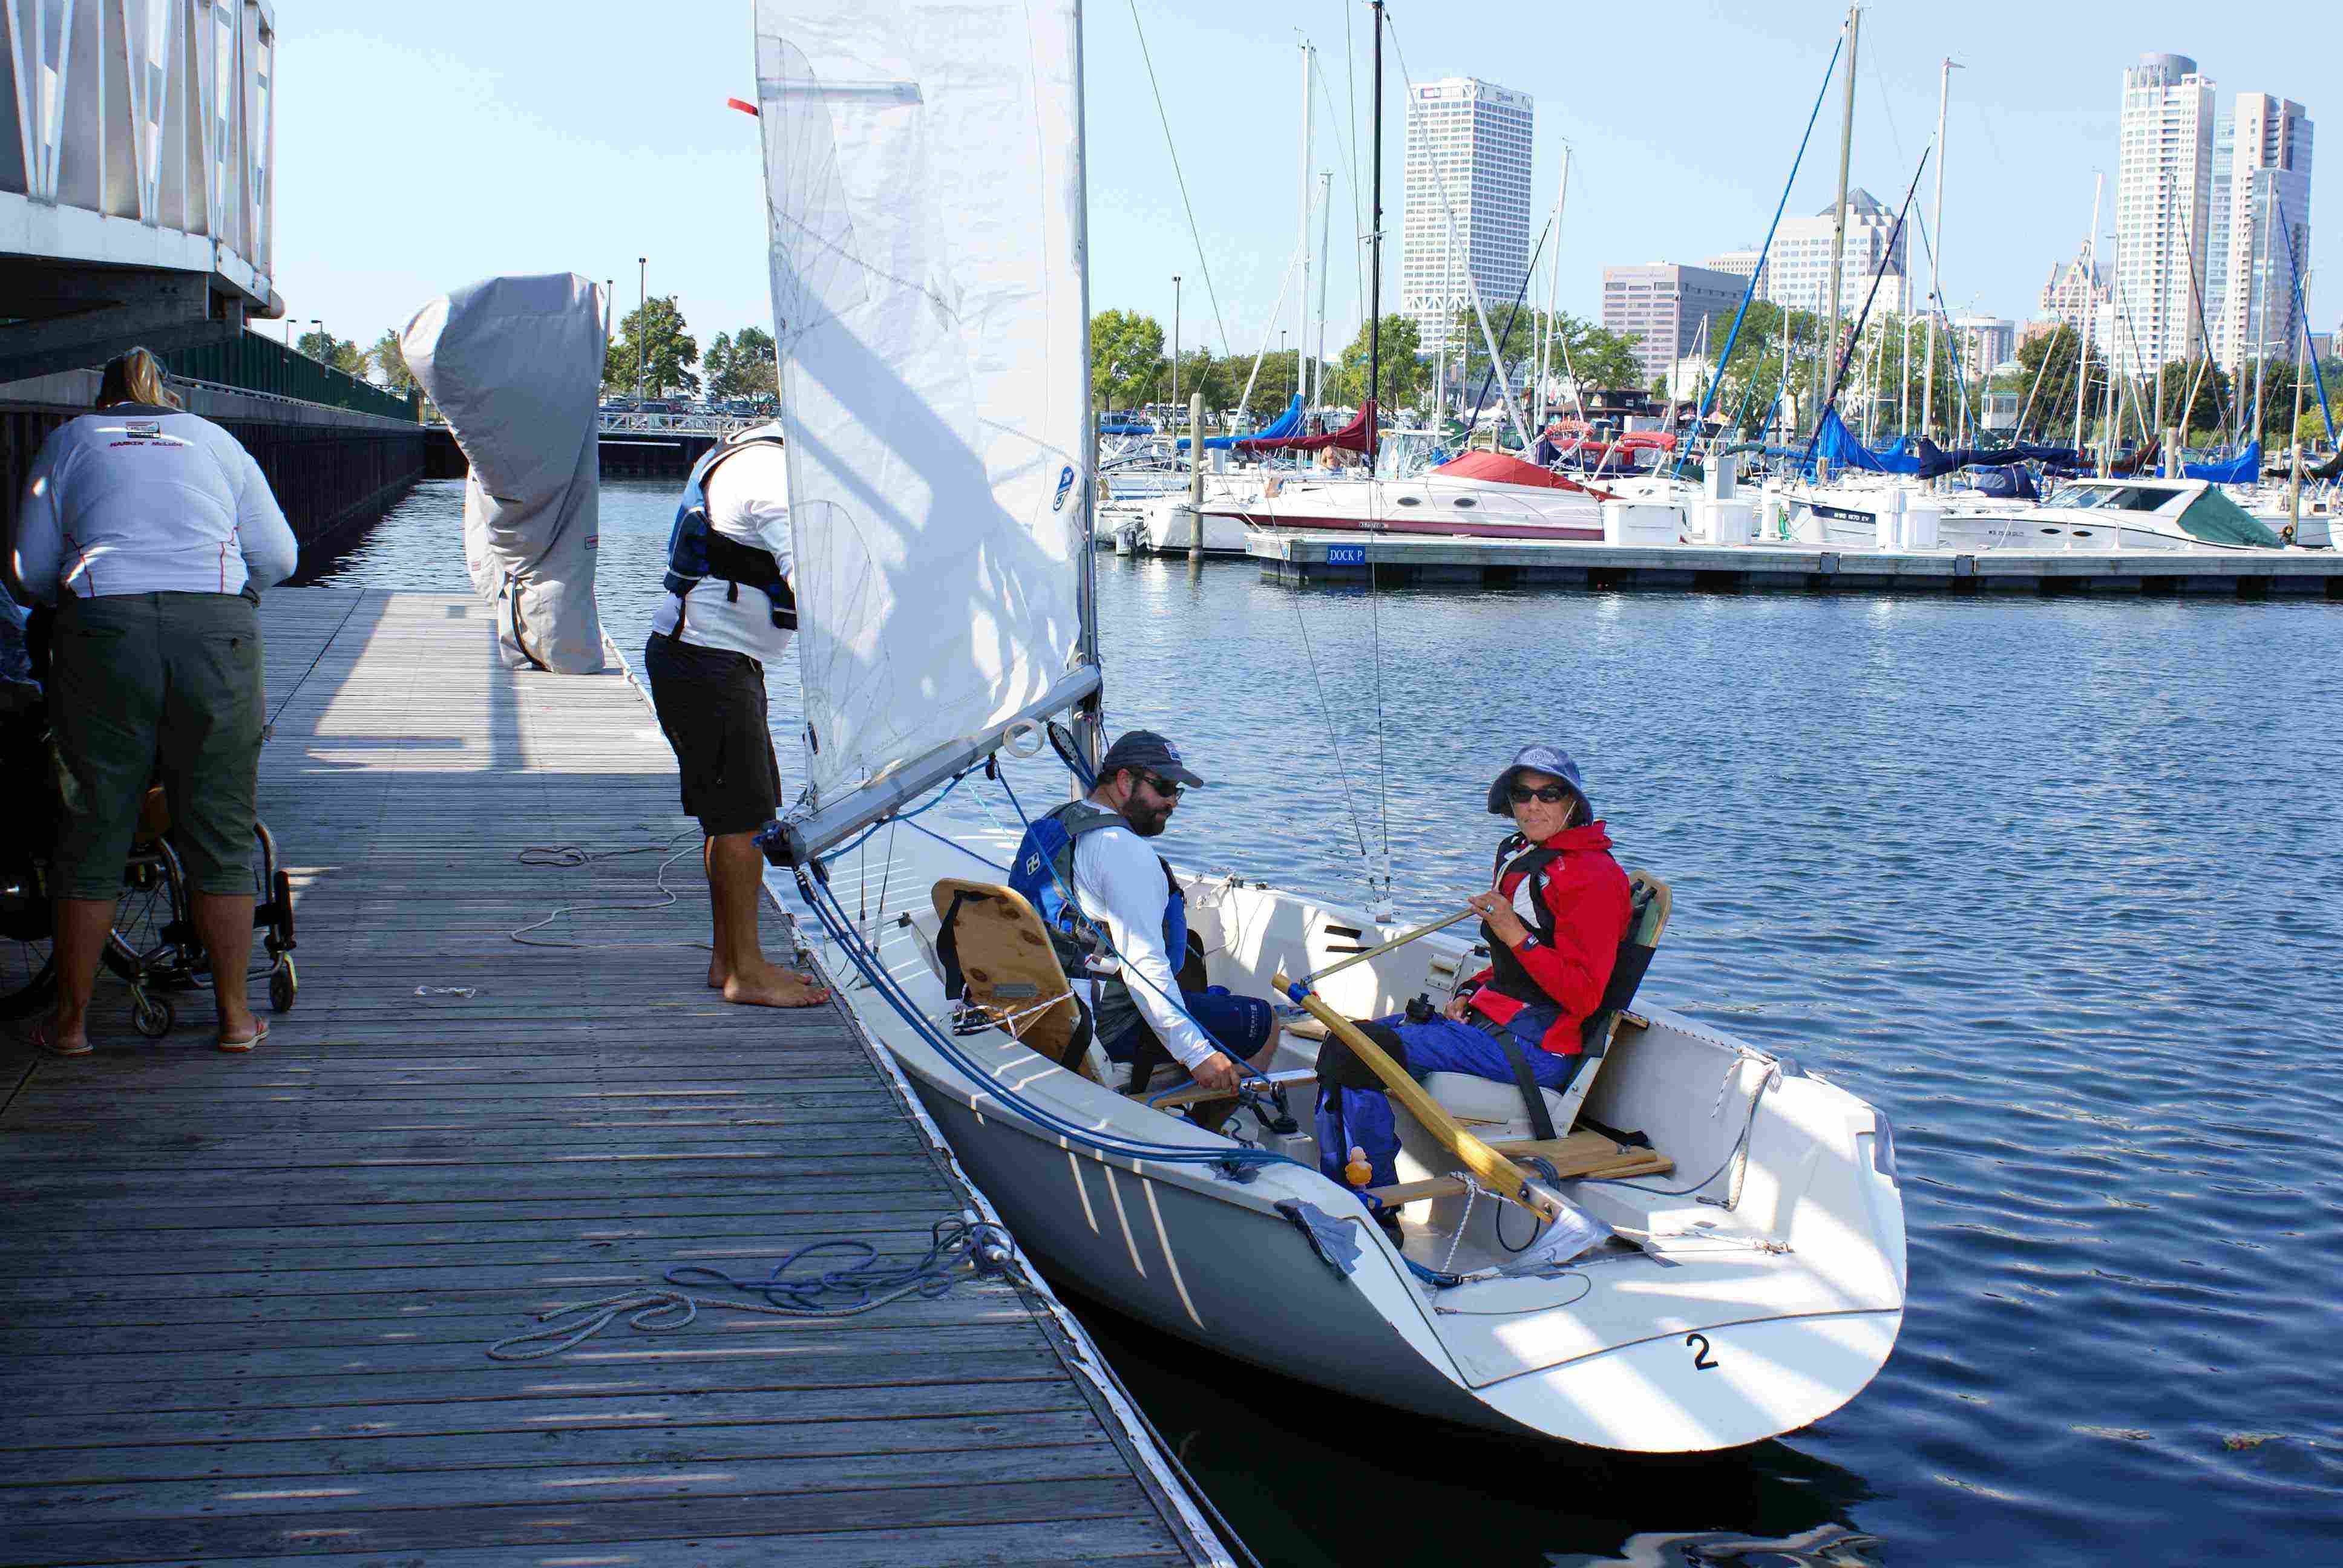 Racing Sailors Ready in Boat